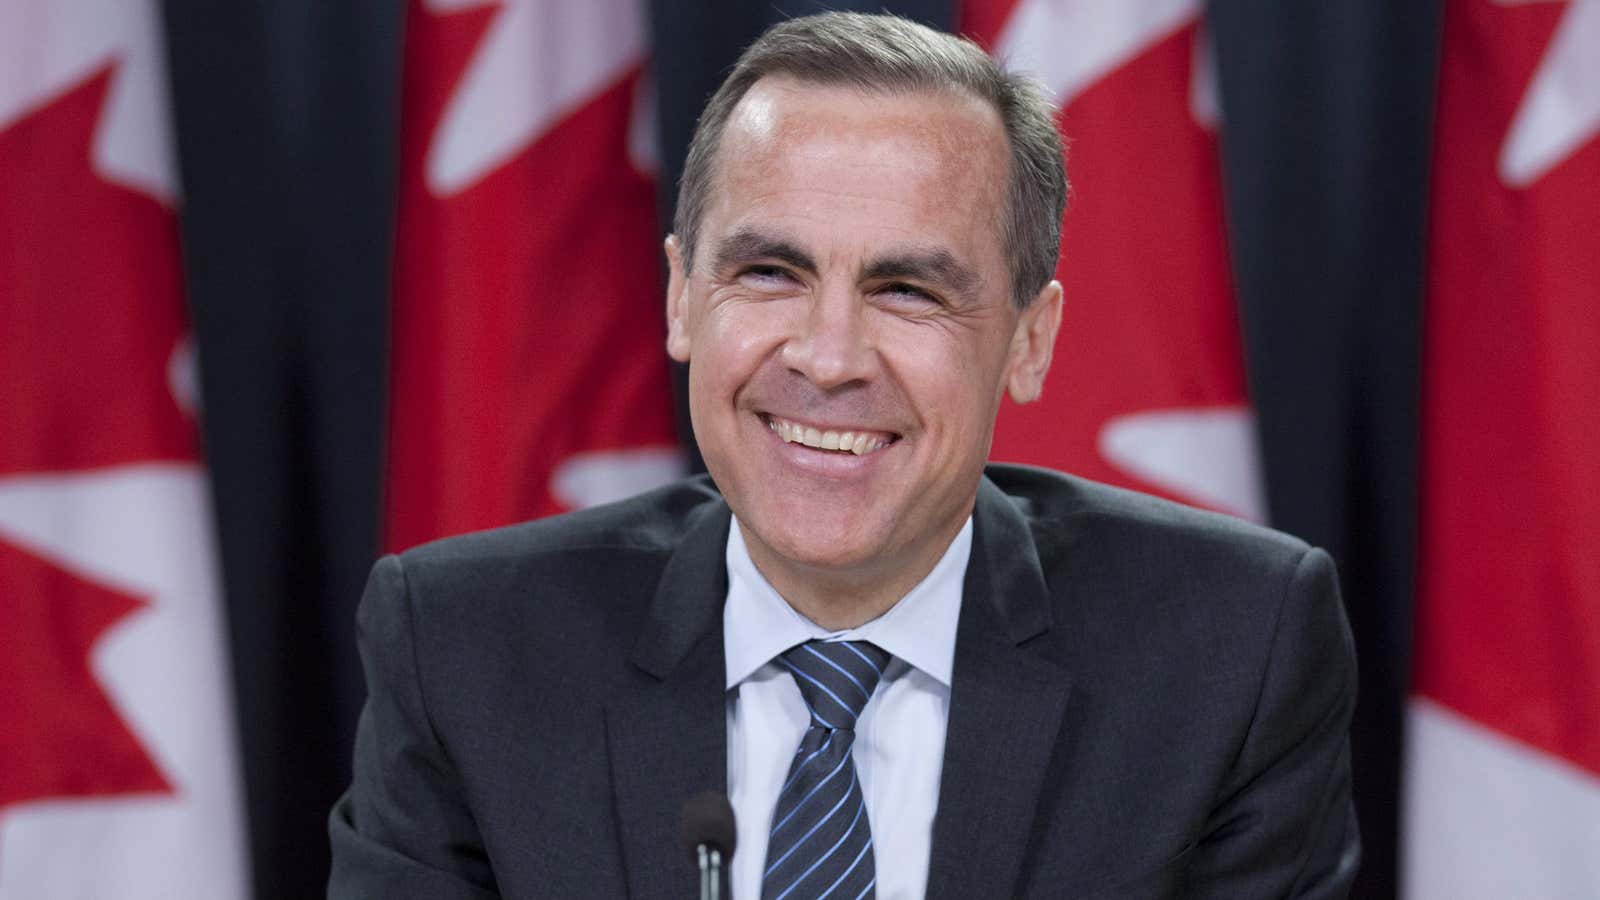 The appointment of Mark Carney as new Bank of England governor has been met with enthusiasm.